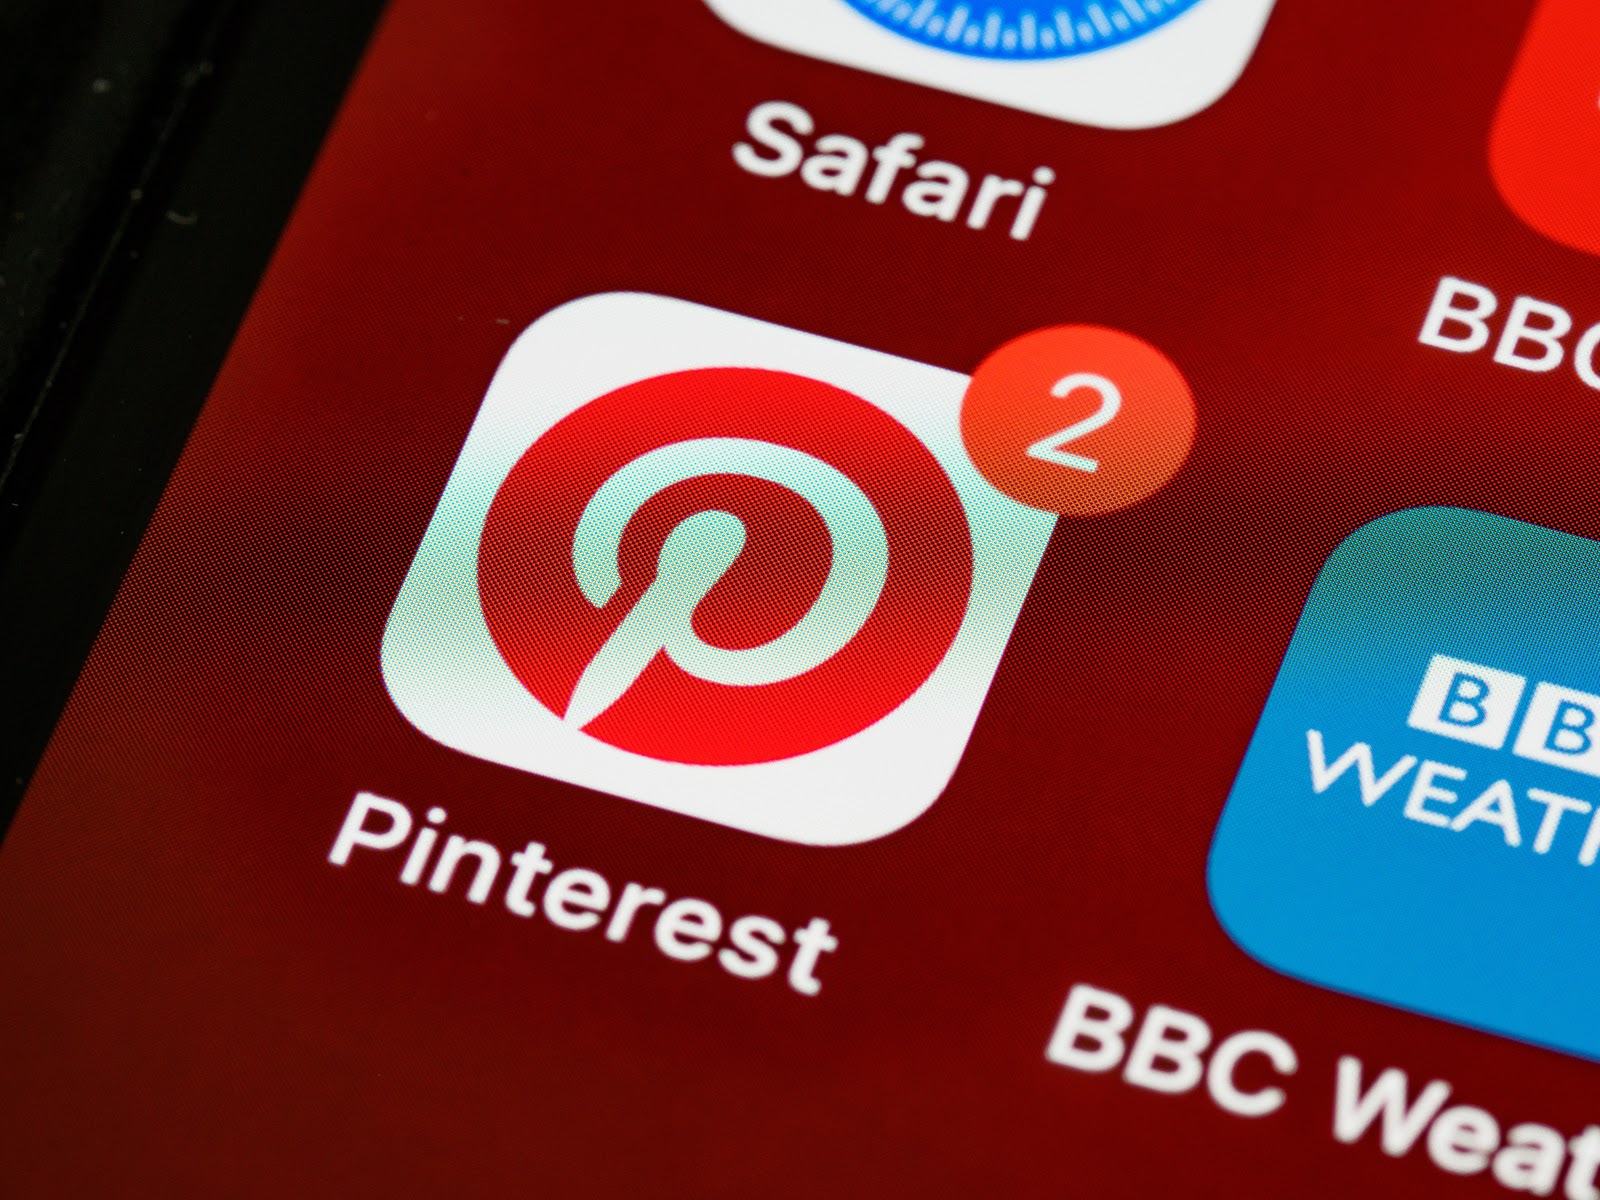 Top 9 sites to promote your contents in 2021 to get required Results: Pinterest